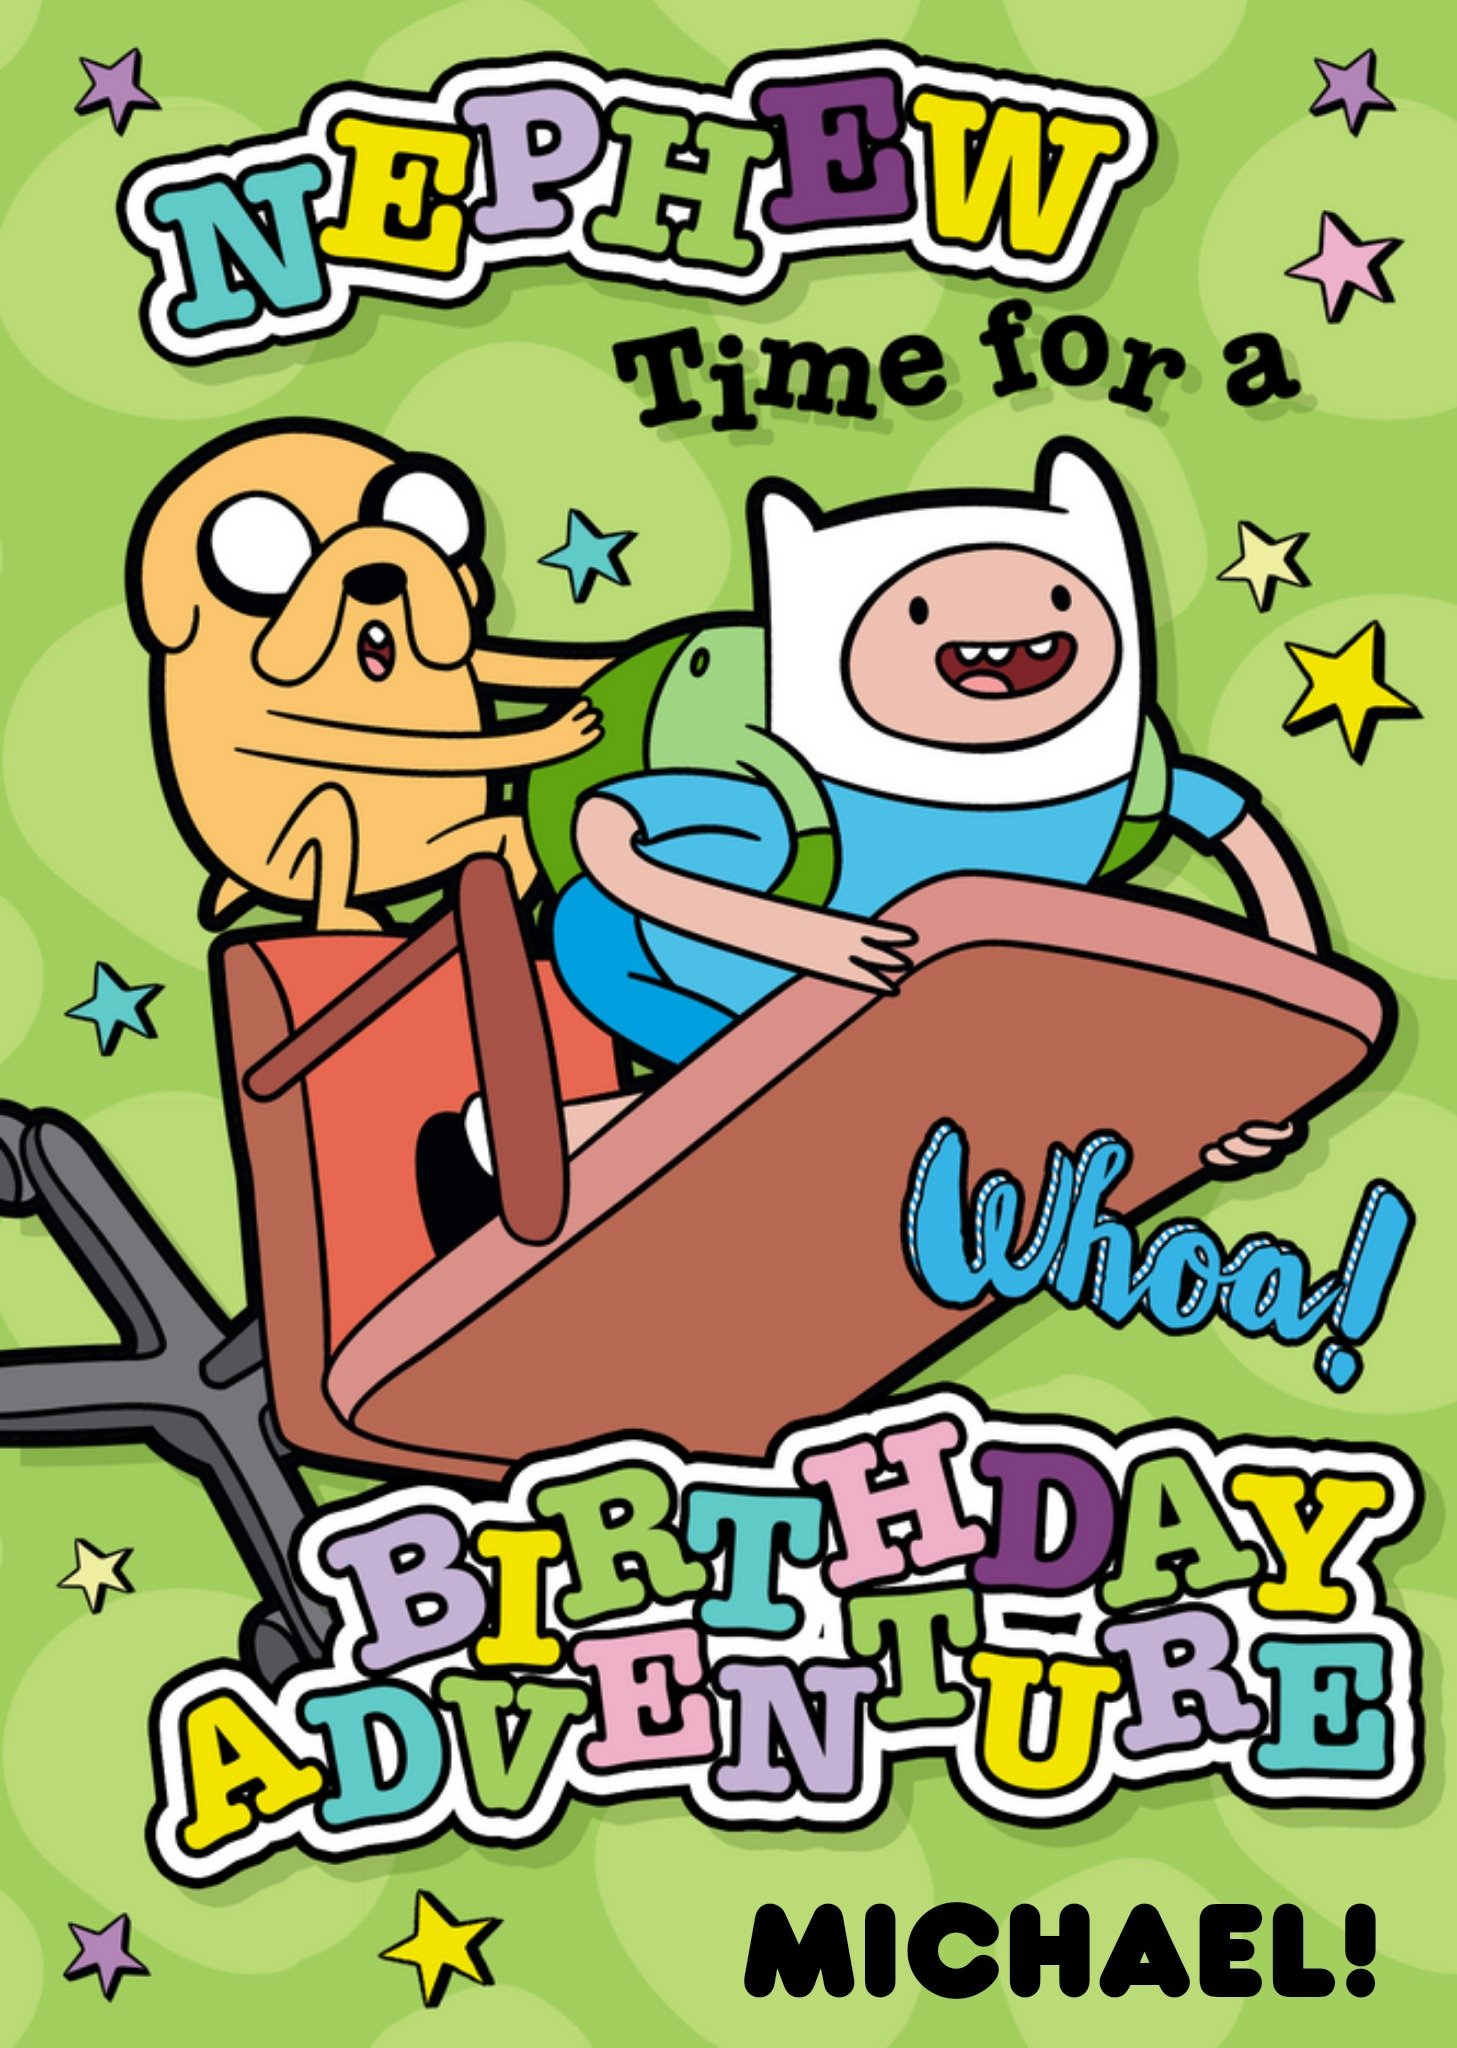 Moonpig Adventure Time Nephew Time For A Birthday Adventure Peronalised Card Ecard